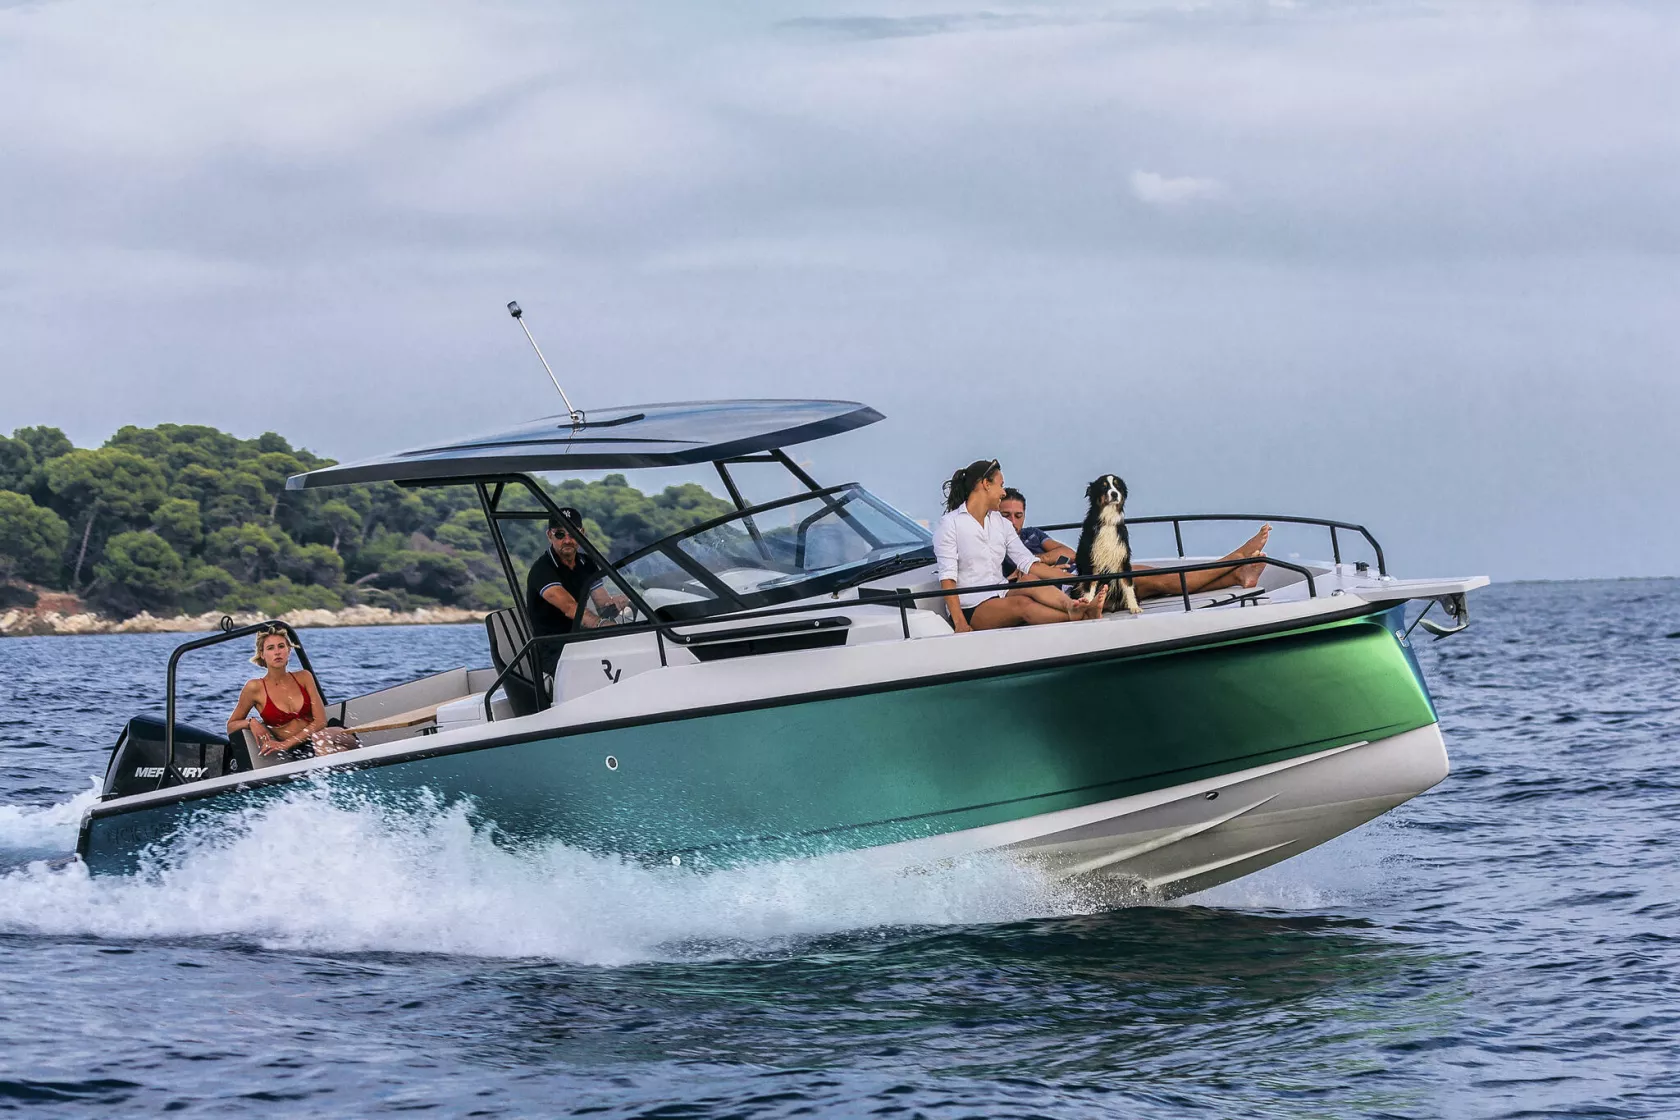 RYCK 280 – IS MOTORBOAT OF THE YEAR 2021